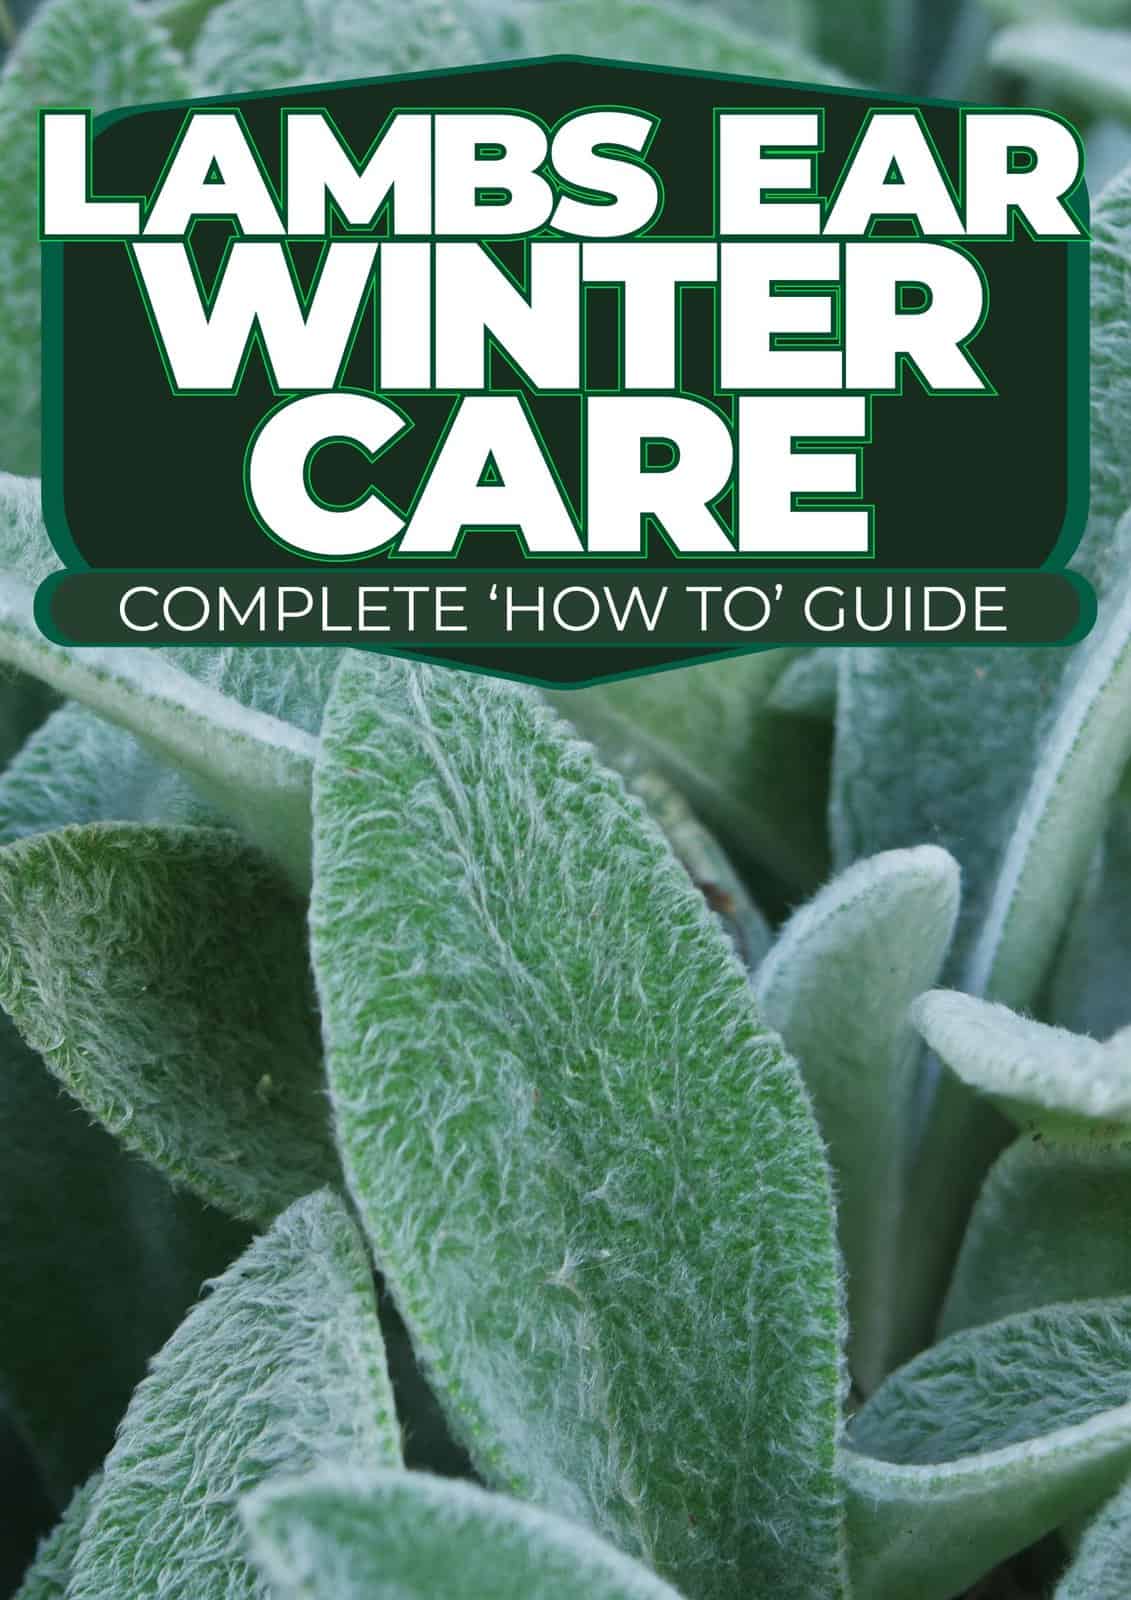 Lambs Ear Winter Care Complete 'How To' Guide